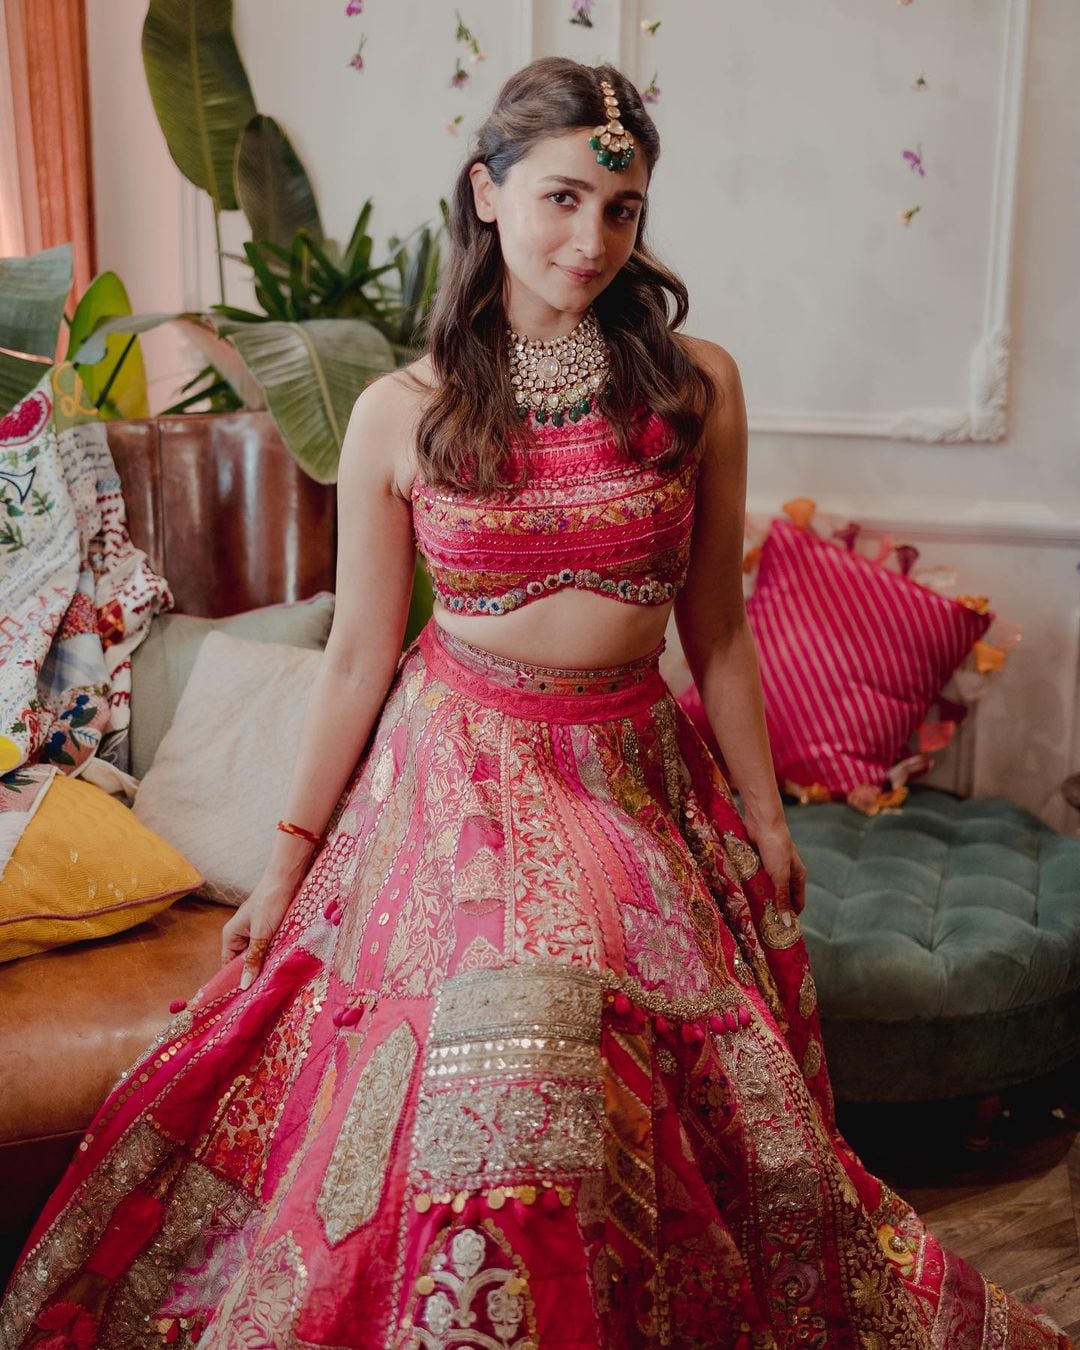 Kamal Bhai Saree Sangam | As Dreamy As It Can Get❤️ . This lehenga by  @kamalbhaisareesangam takes centre stage with its exquisite hue and  intricate detailings.... | Instagram